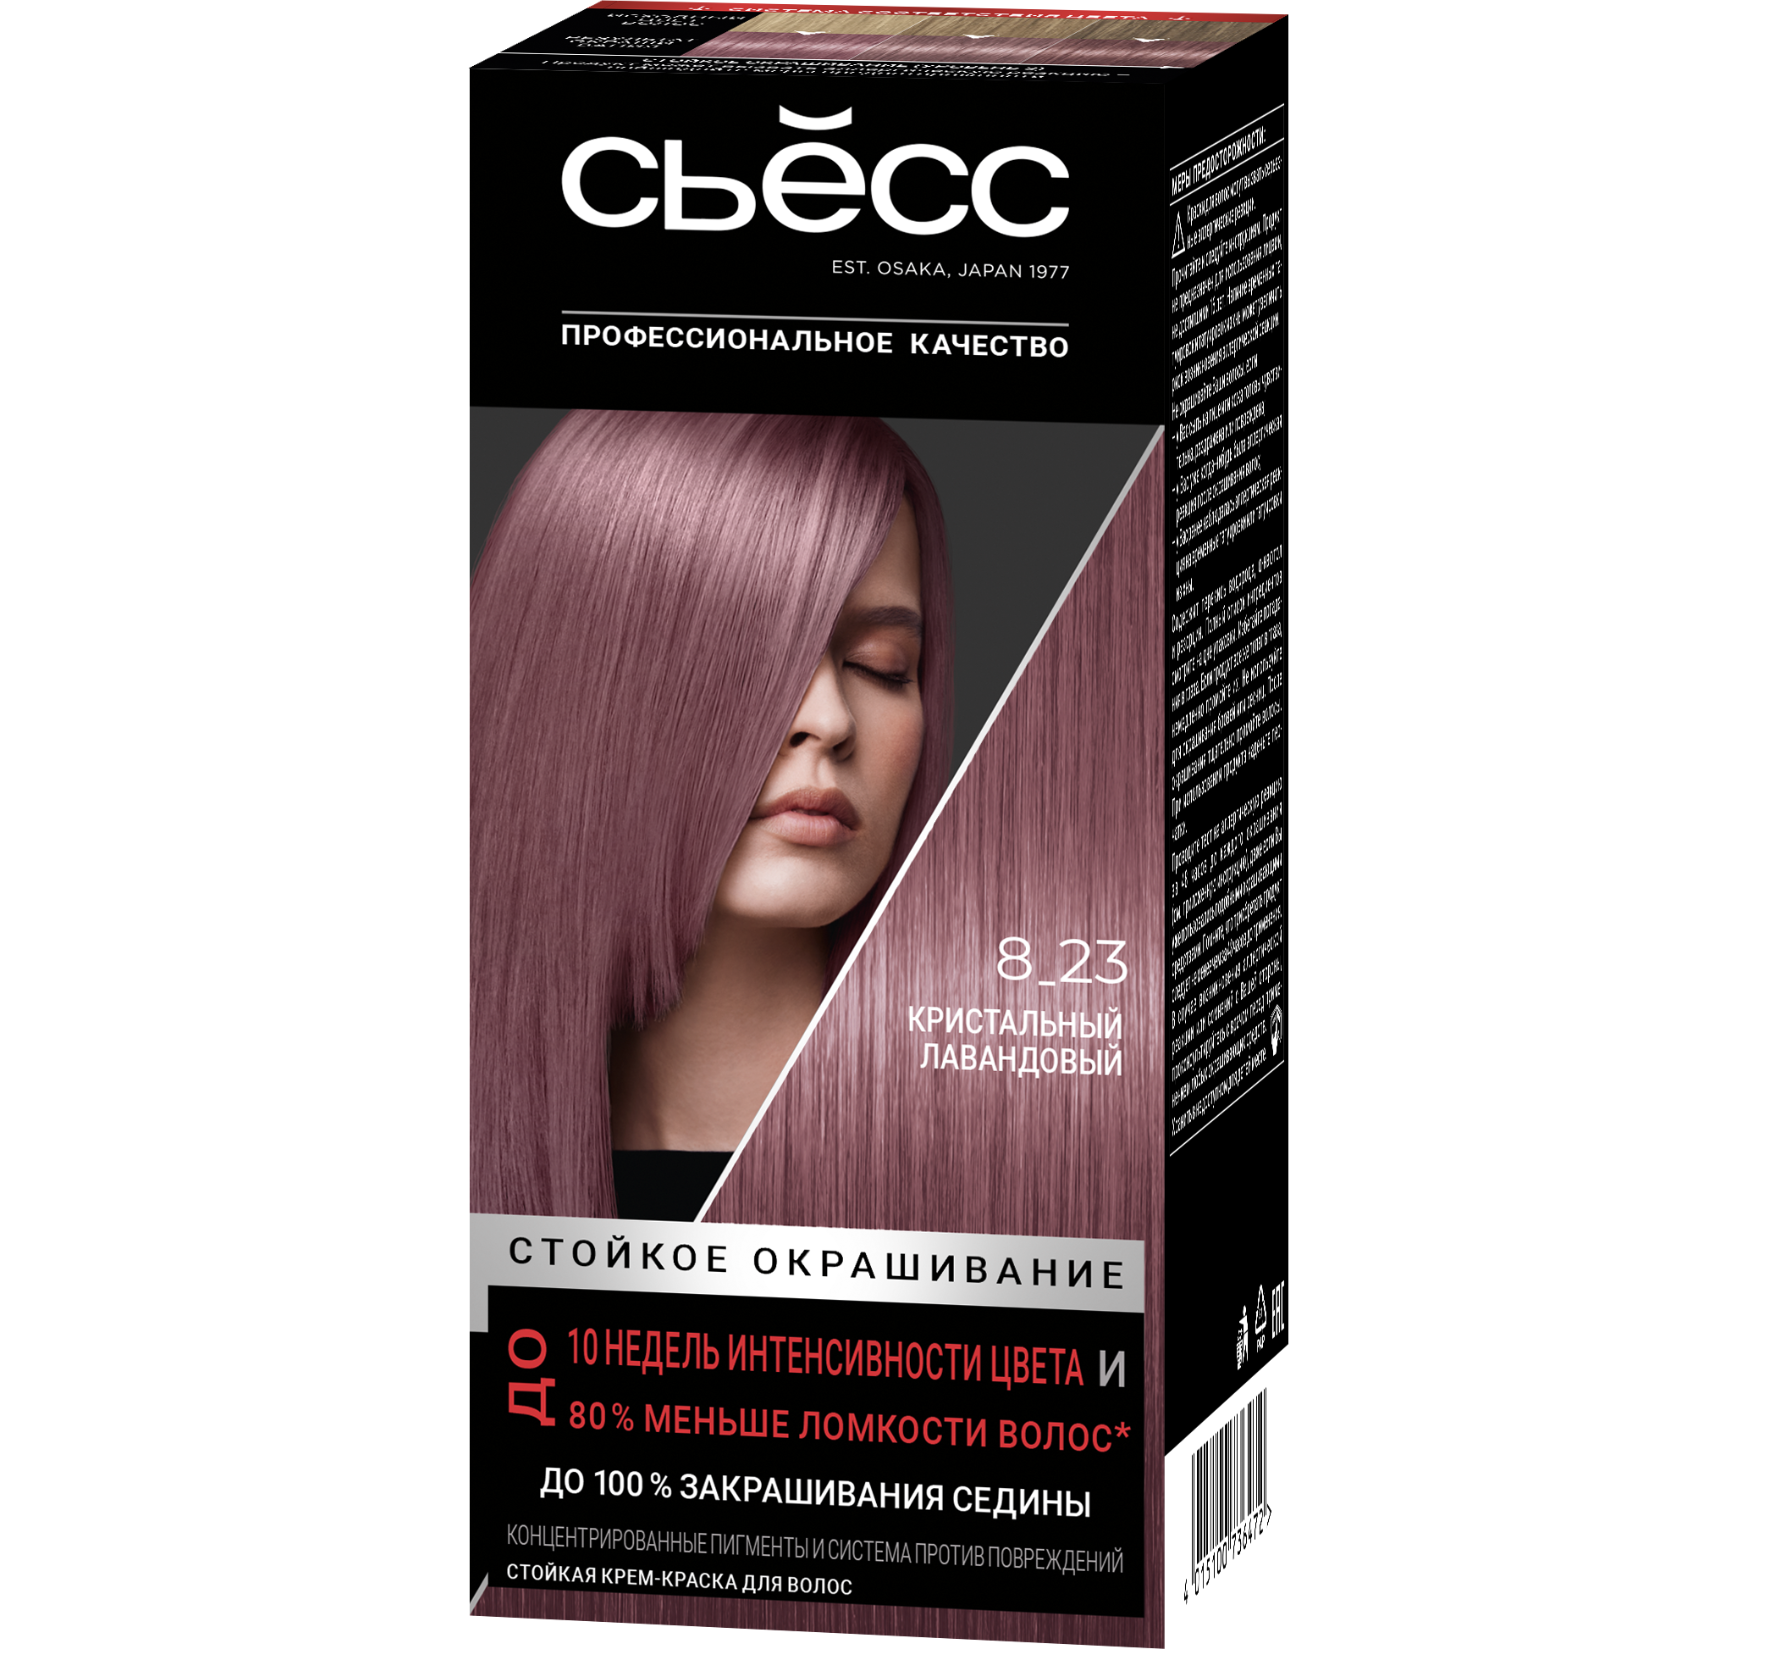   / Syoss -    Permanent Coloration 18-3530 Lavender Crystal 115  ( 8-23)